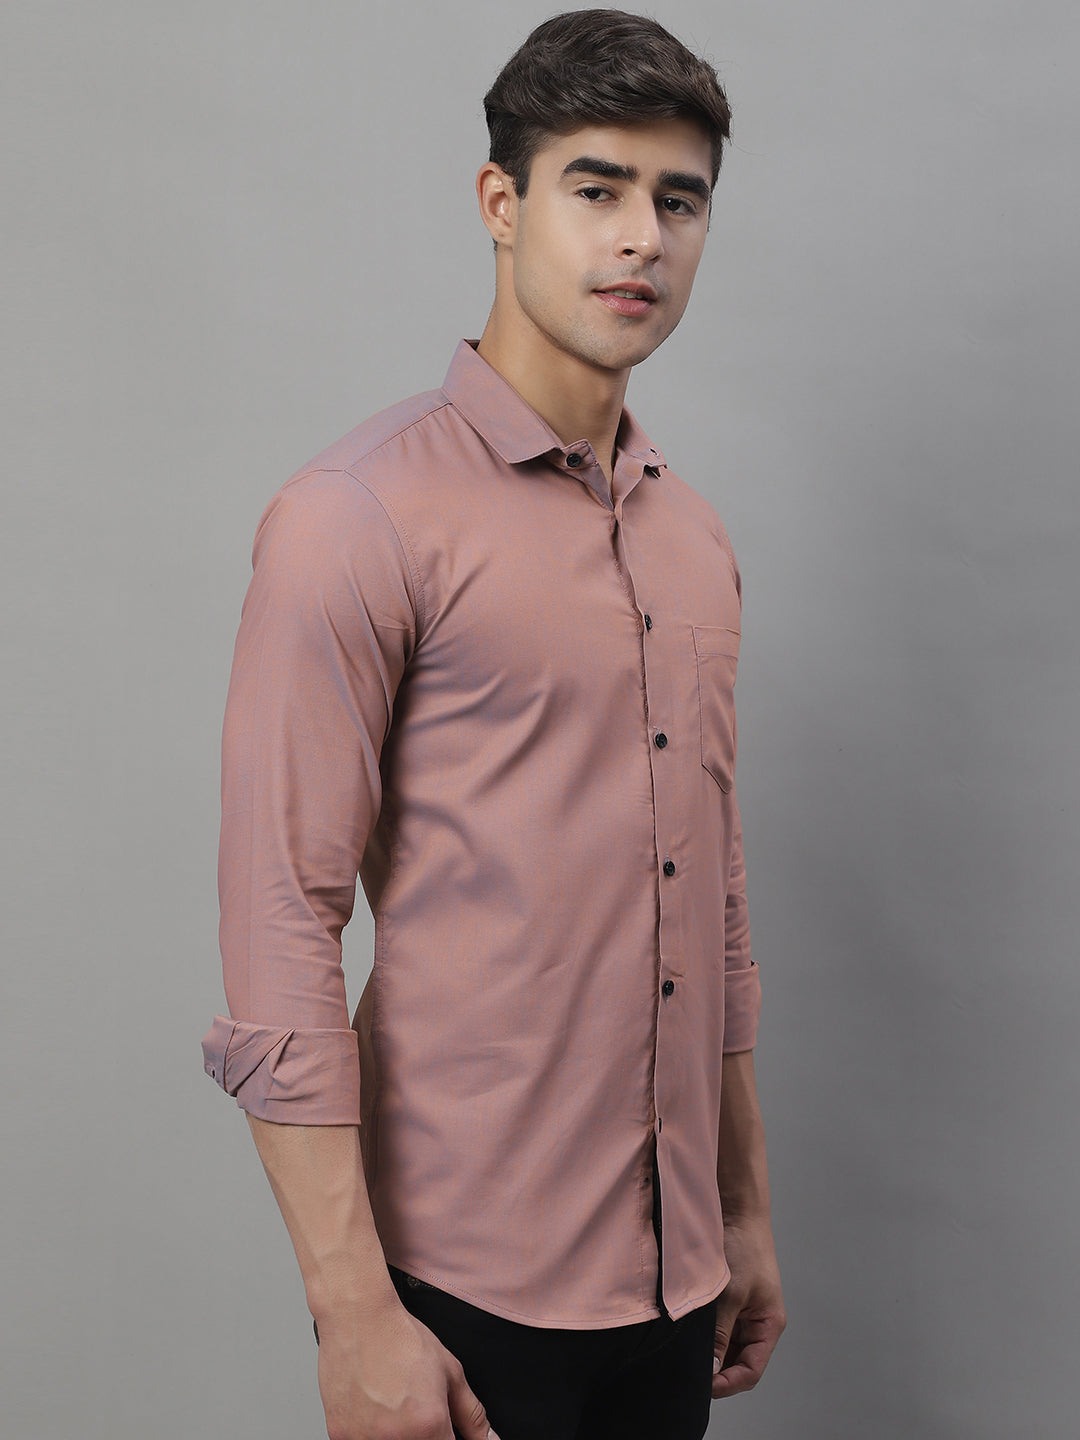 Unique and Classy Casual Shirt - Rose Gold